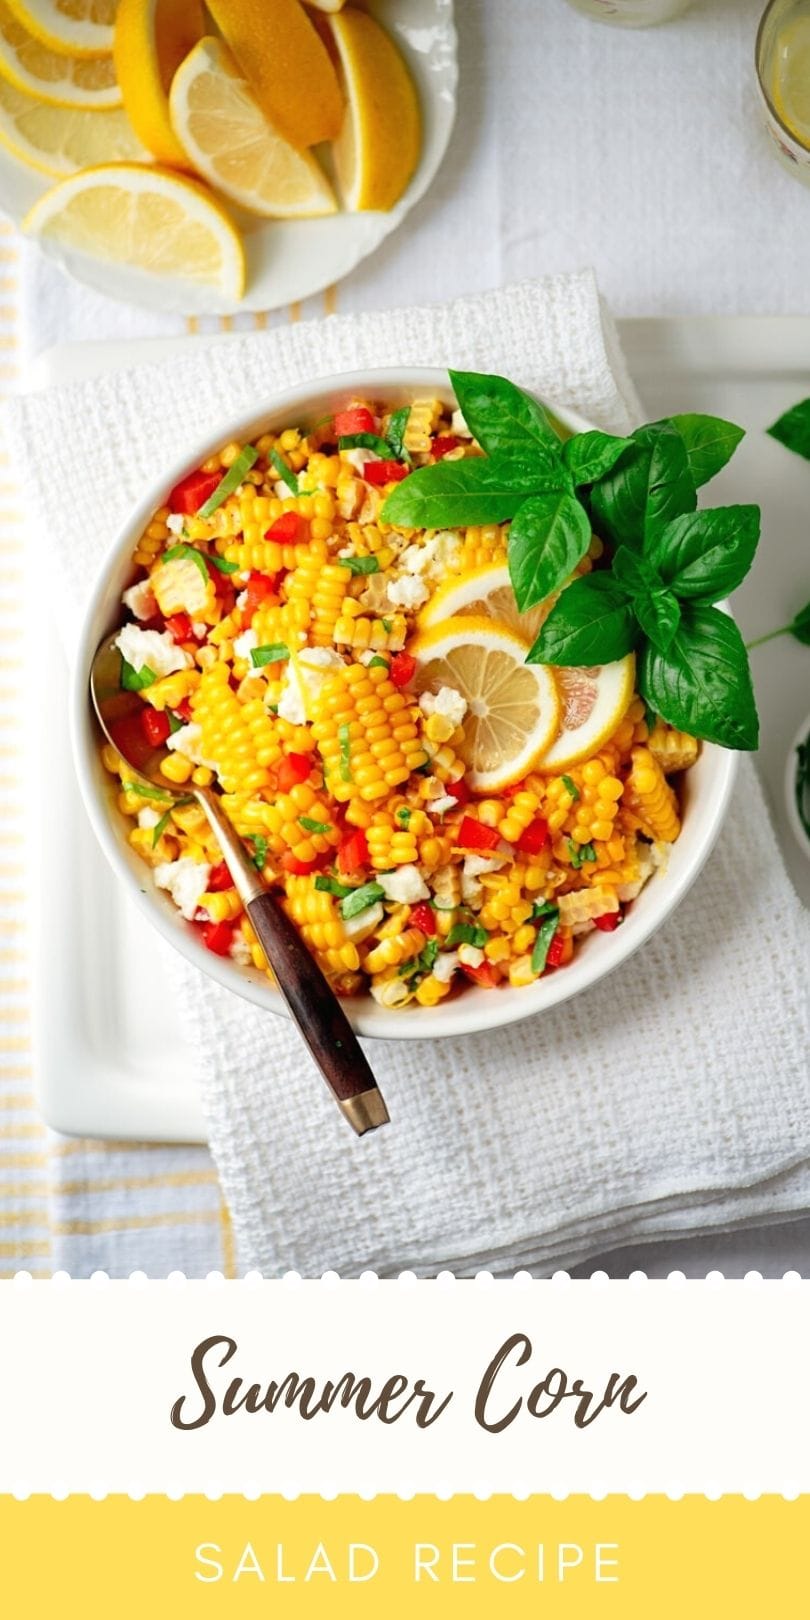 Copy of Peach Tea - Summer Corn Salad with Basil and Queso Fresco